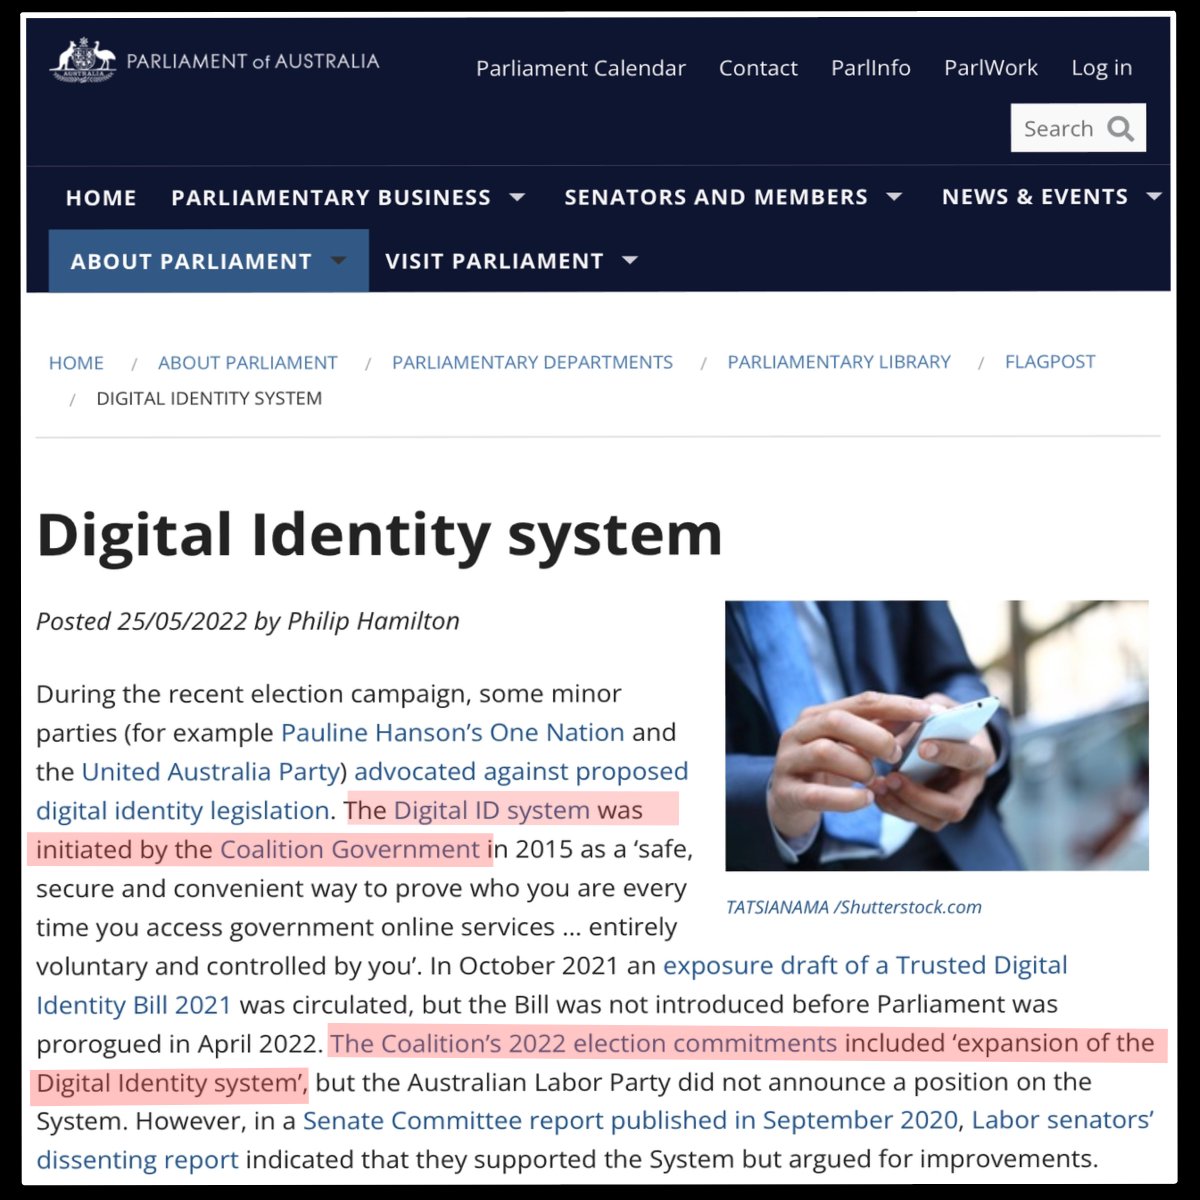 THE LIBERALS WROTE THE ORIGINAL DIGITAL ID BILL Don’t be fooled by the Liberals voting against Albanese’s Digital ID Bill For it was the Liberals that drafted the ordinal Digital bill. Further, the Liberal‘s policy at last election included 'expansion of the Digital Identity…